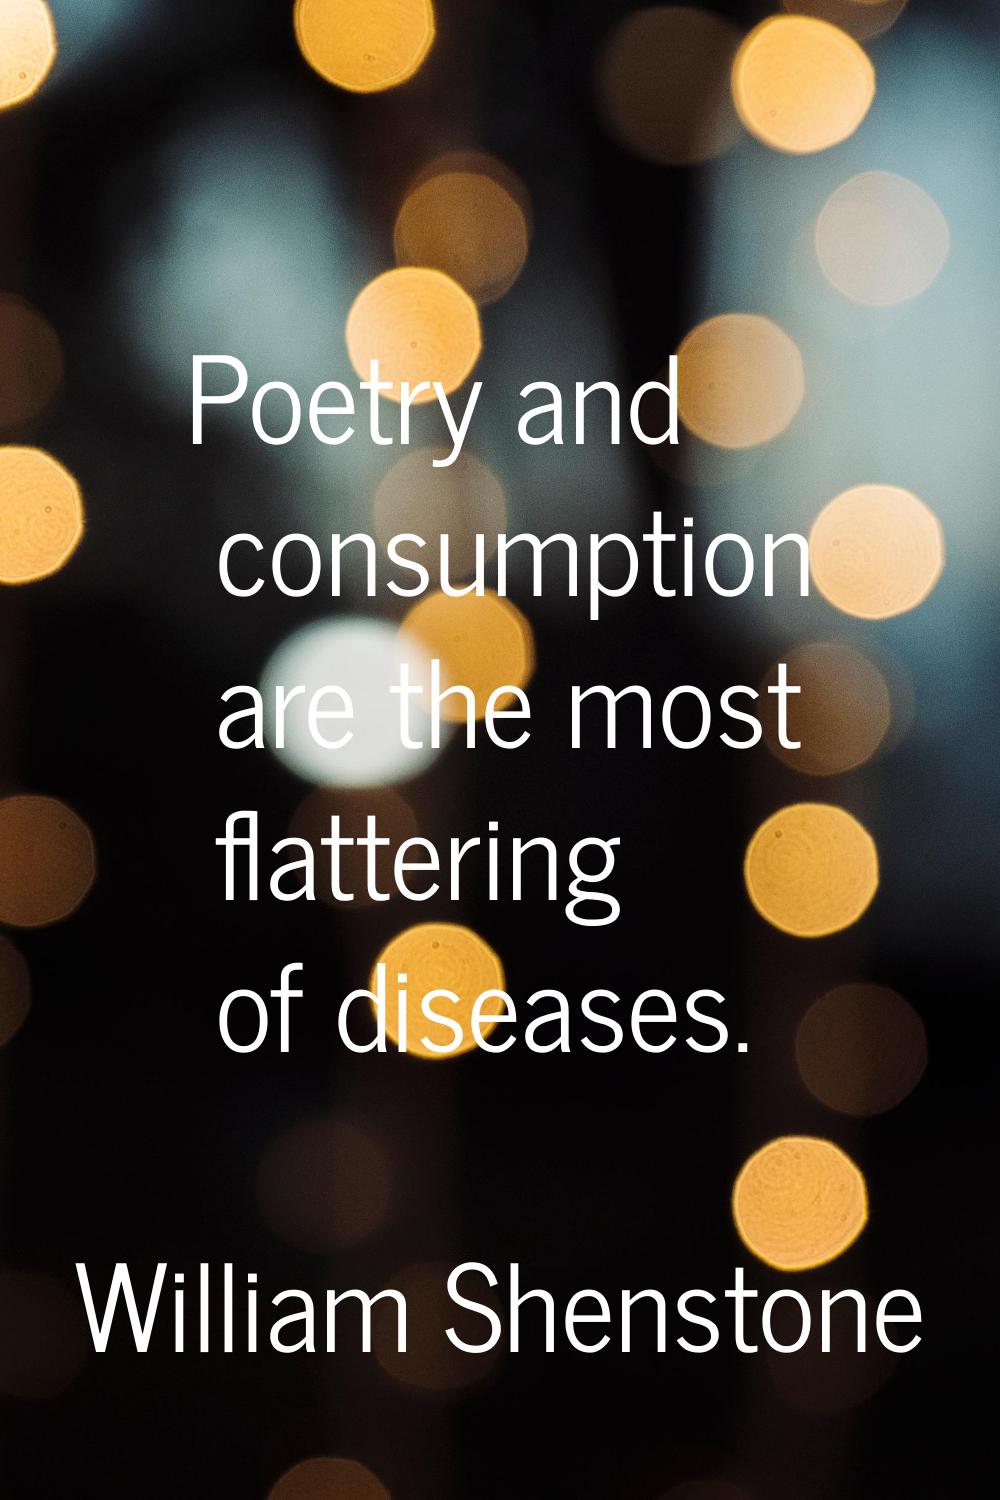 Poetry and consumption are the most flattering of diseases.